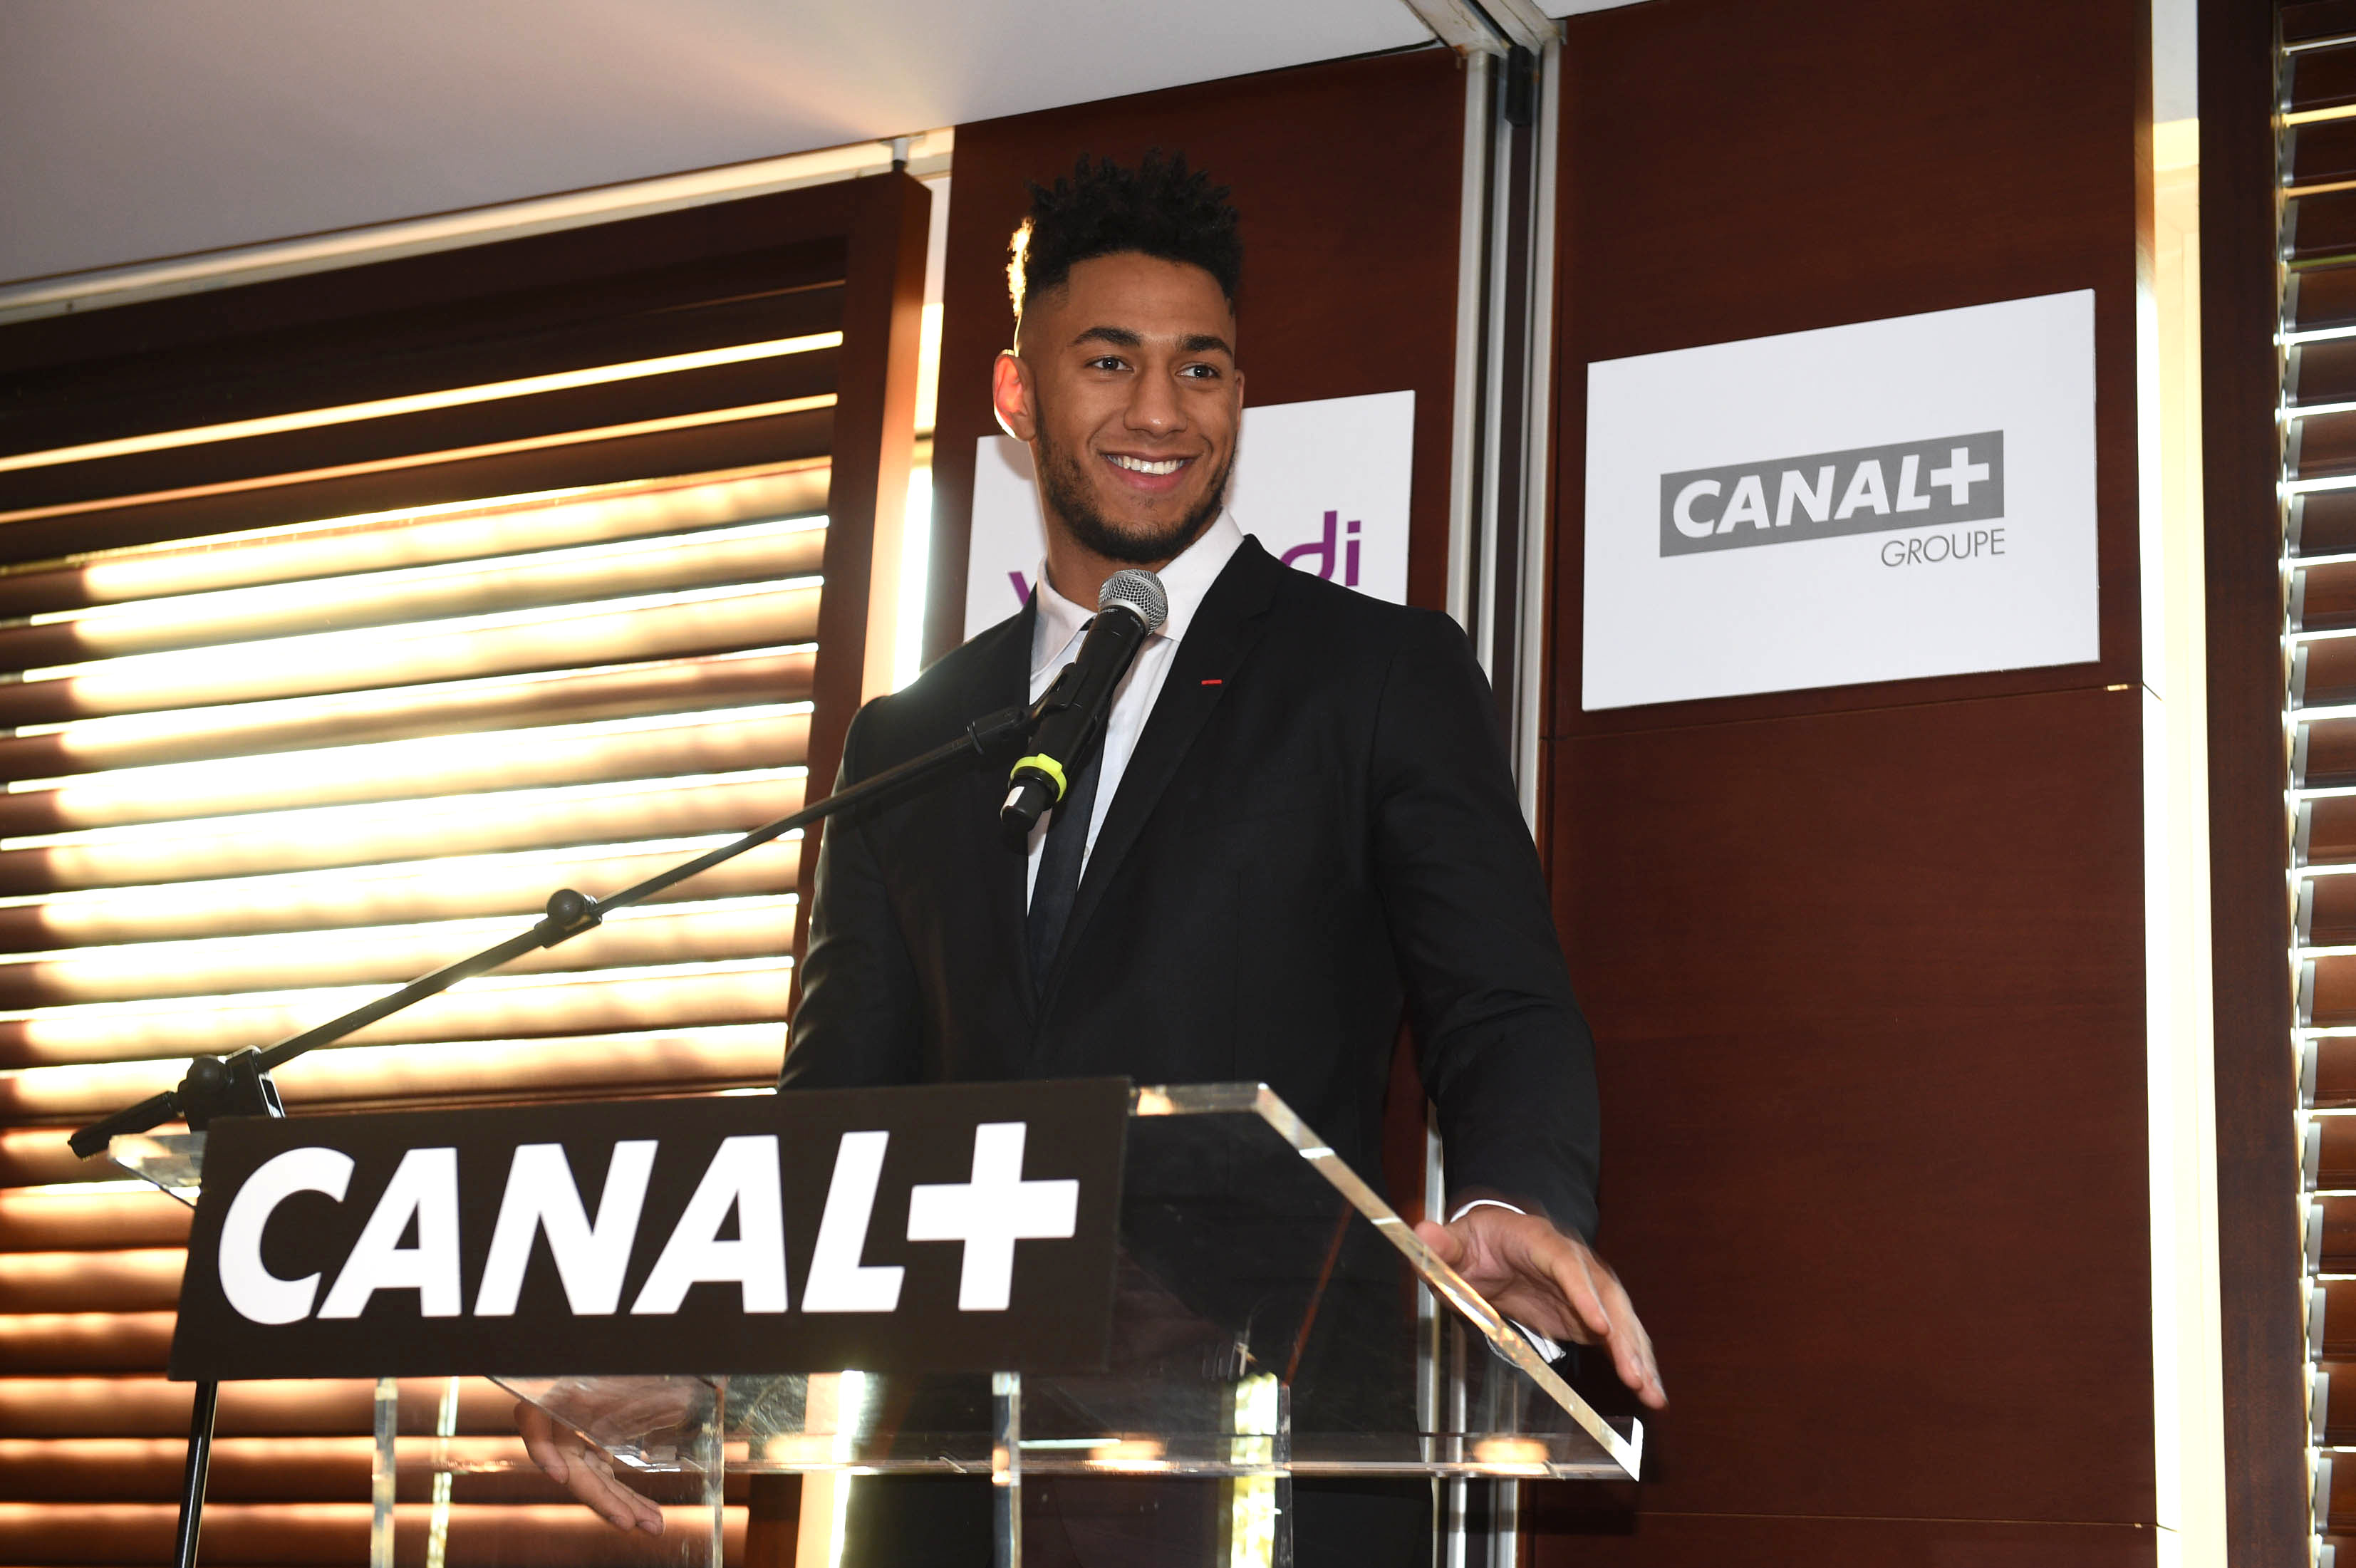 French boxer Tony Yoka enters the ring with Canal+ in his corner